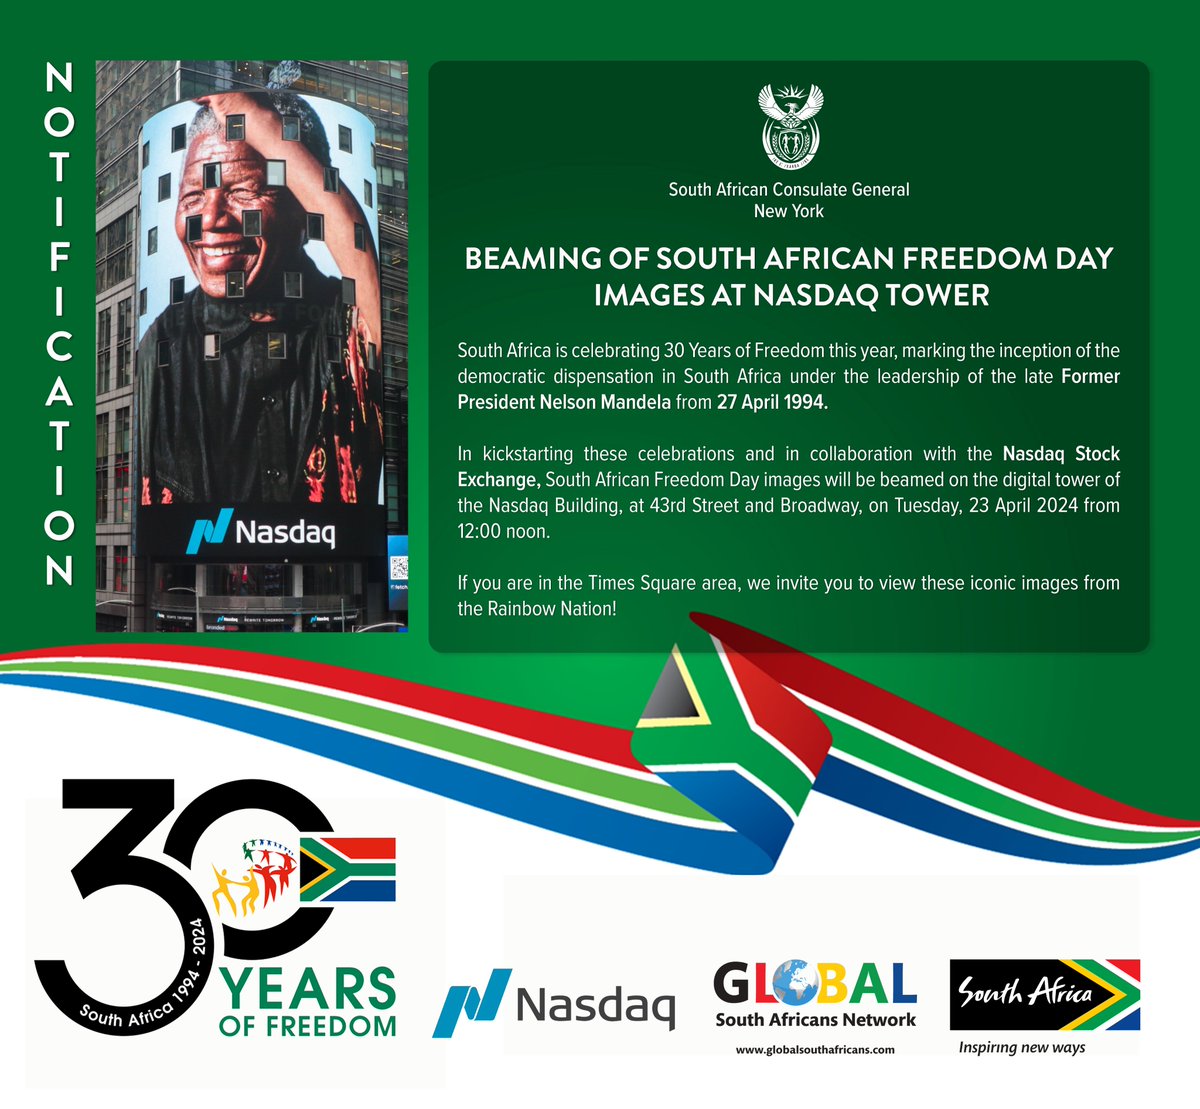 South African Freedom Day images will be beamed today  on the digital tower of the @Nasdaq Building at 43rd Street and Broadway on Tuesday 23 April 2024 from 12:00 noon. We invite you to view these iconic images from the Rainbow Nation! See you there! #SAinNY #30YearsOfFreedom